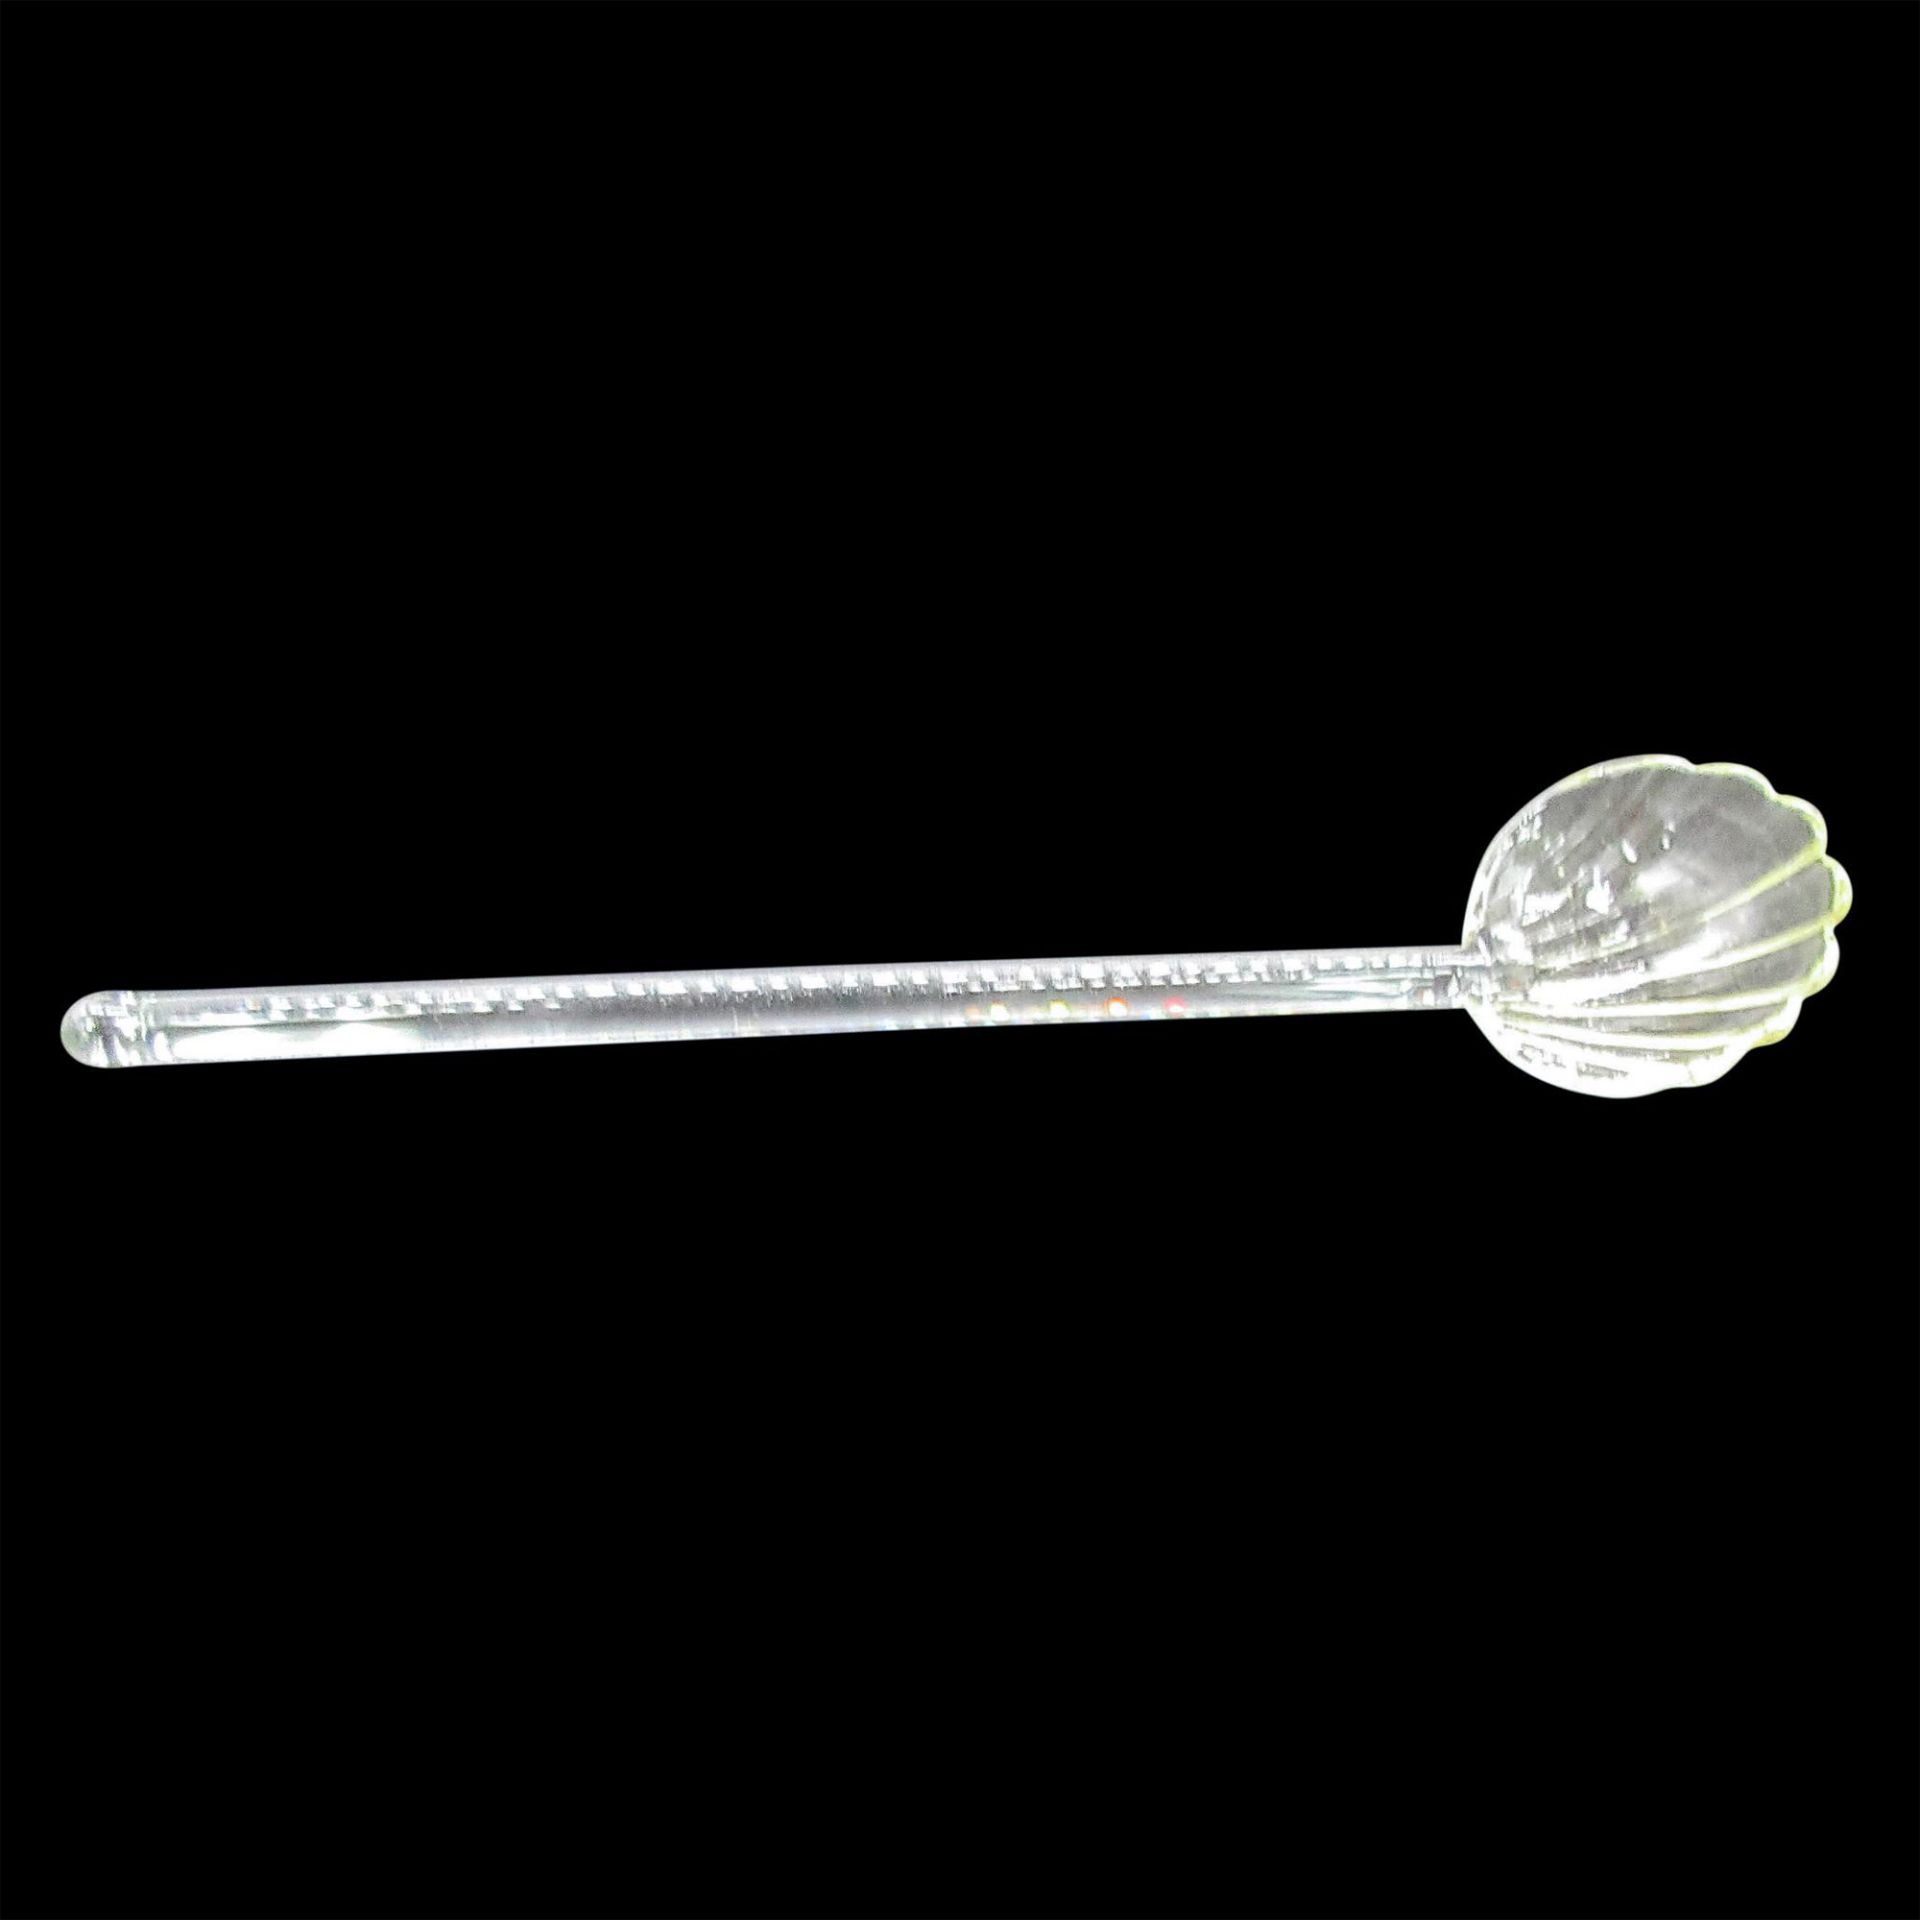 5pc Small Glass Ladles - Image 12 of 16